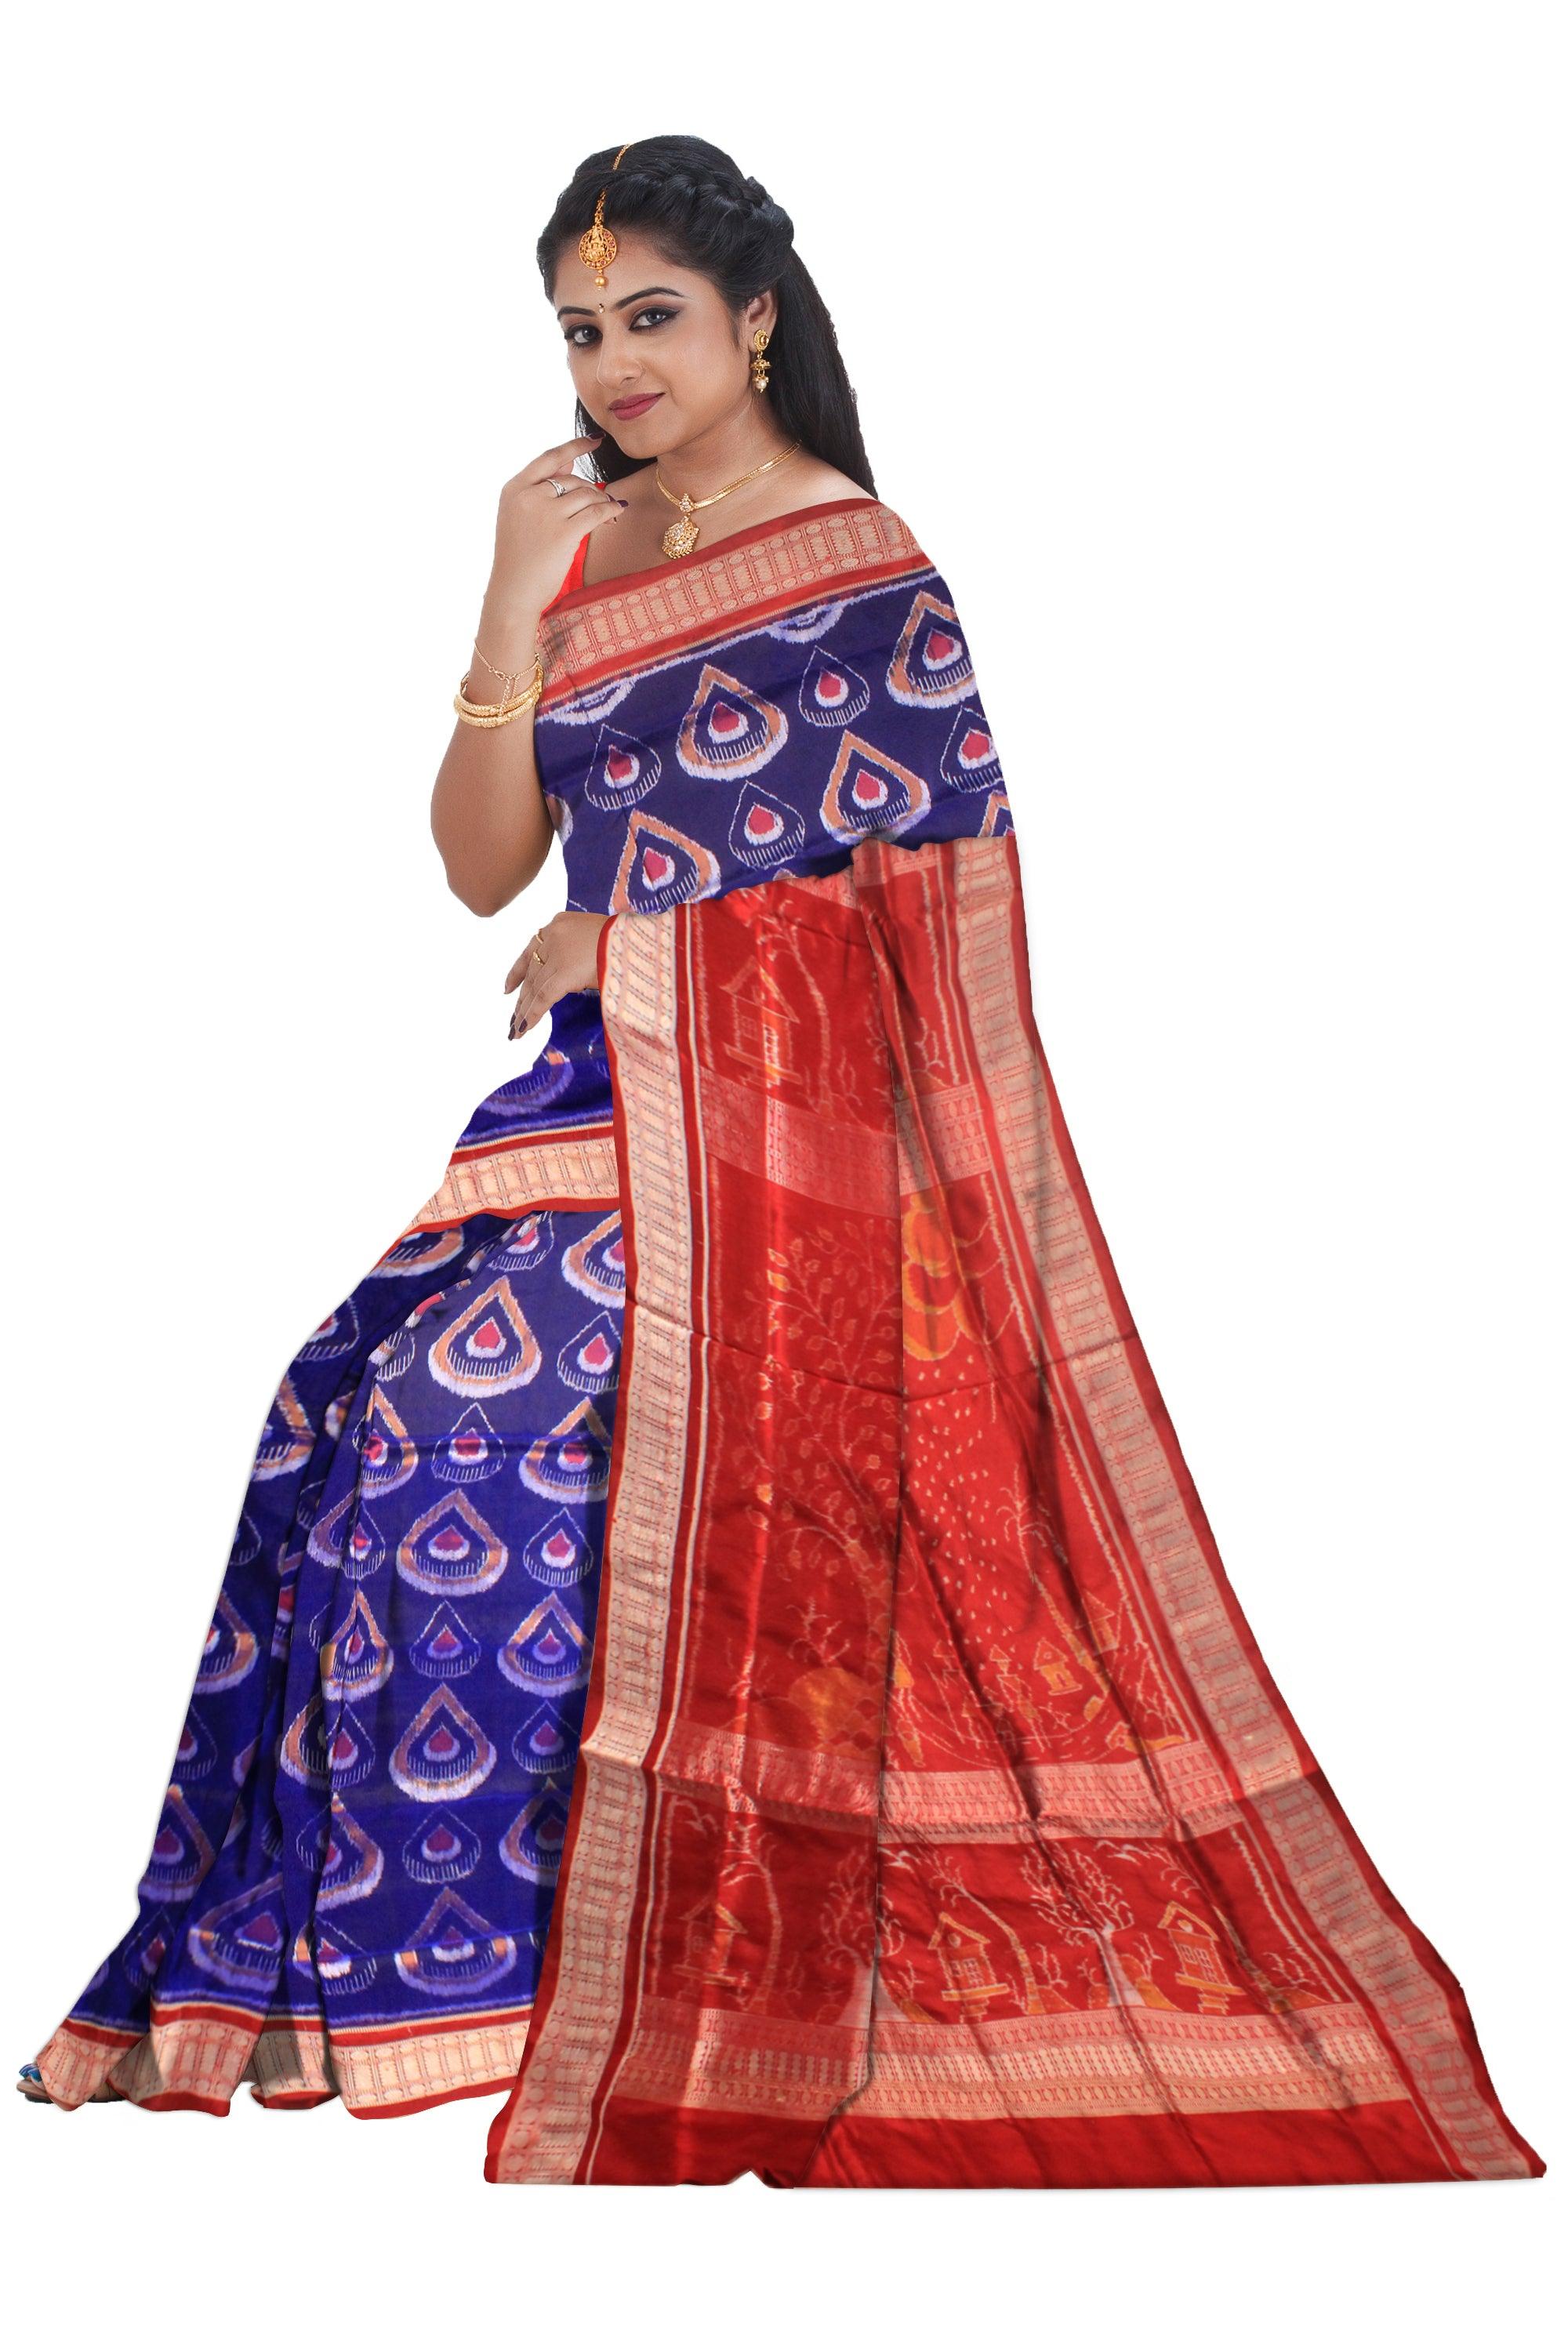 RAINY QUEEN DESIGN BLUE AND RED COLOR WITH BLOUSE PIECE. - Koshali Arts & Crafts Enterprise